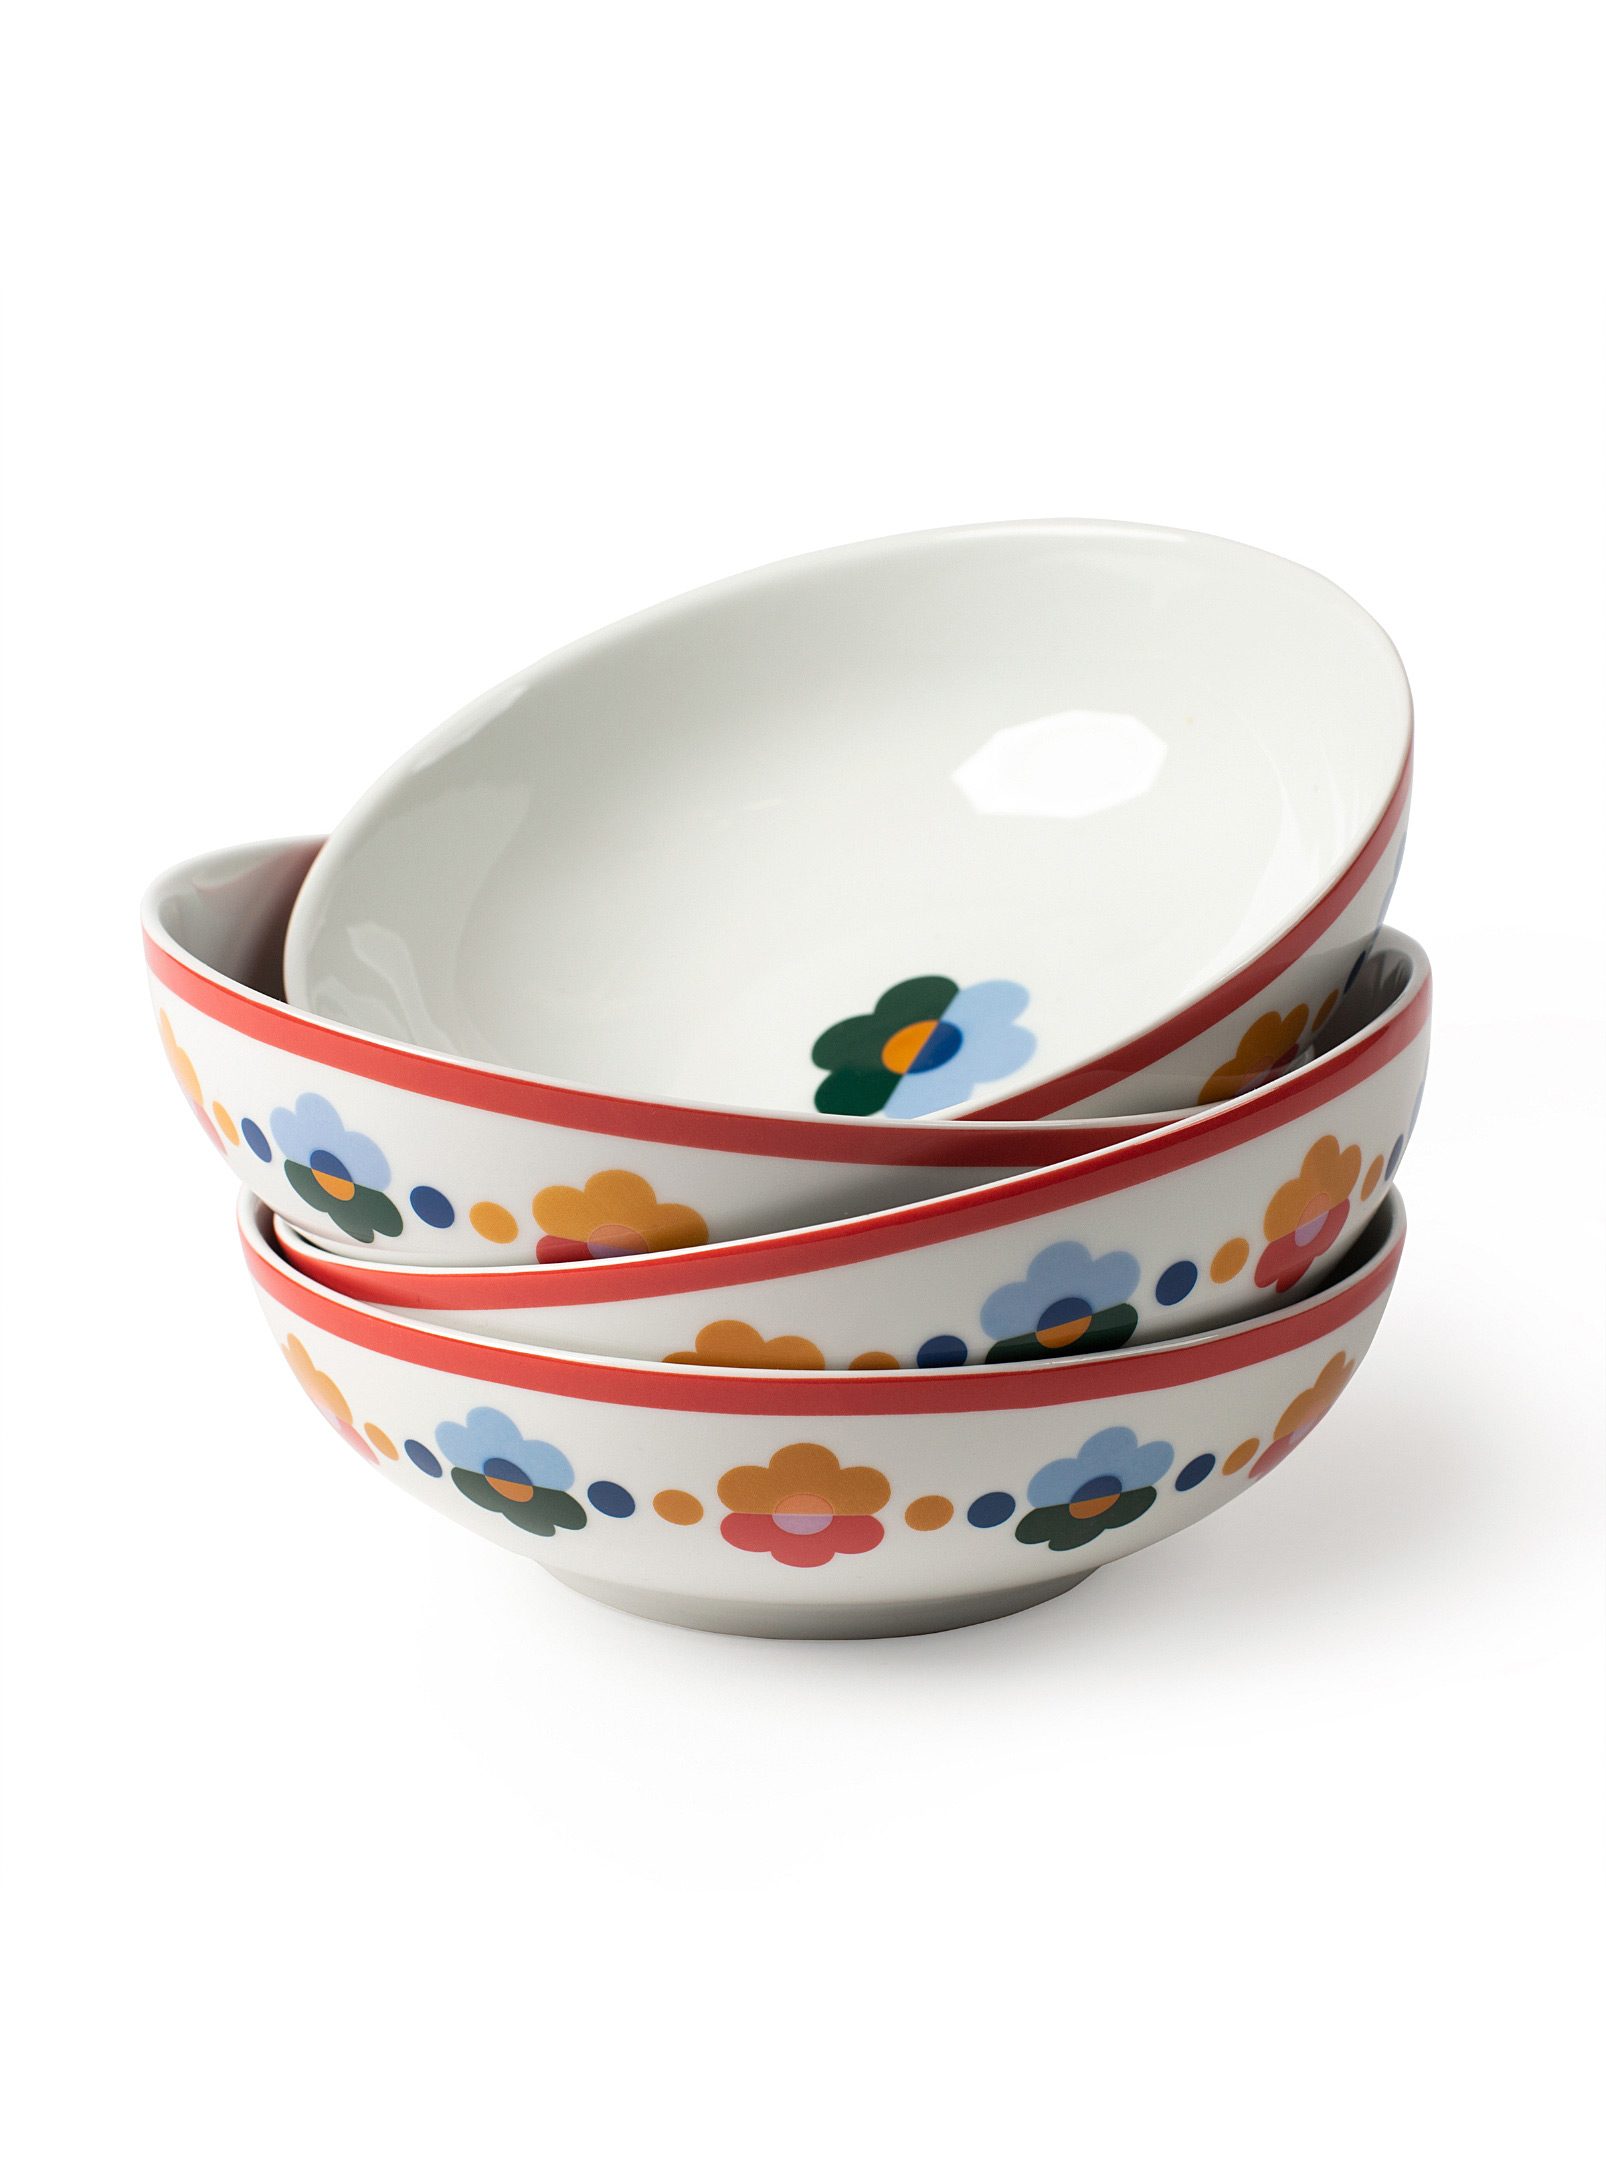 Misette Retro Flowers Bowls Set Of 4 In Assorted